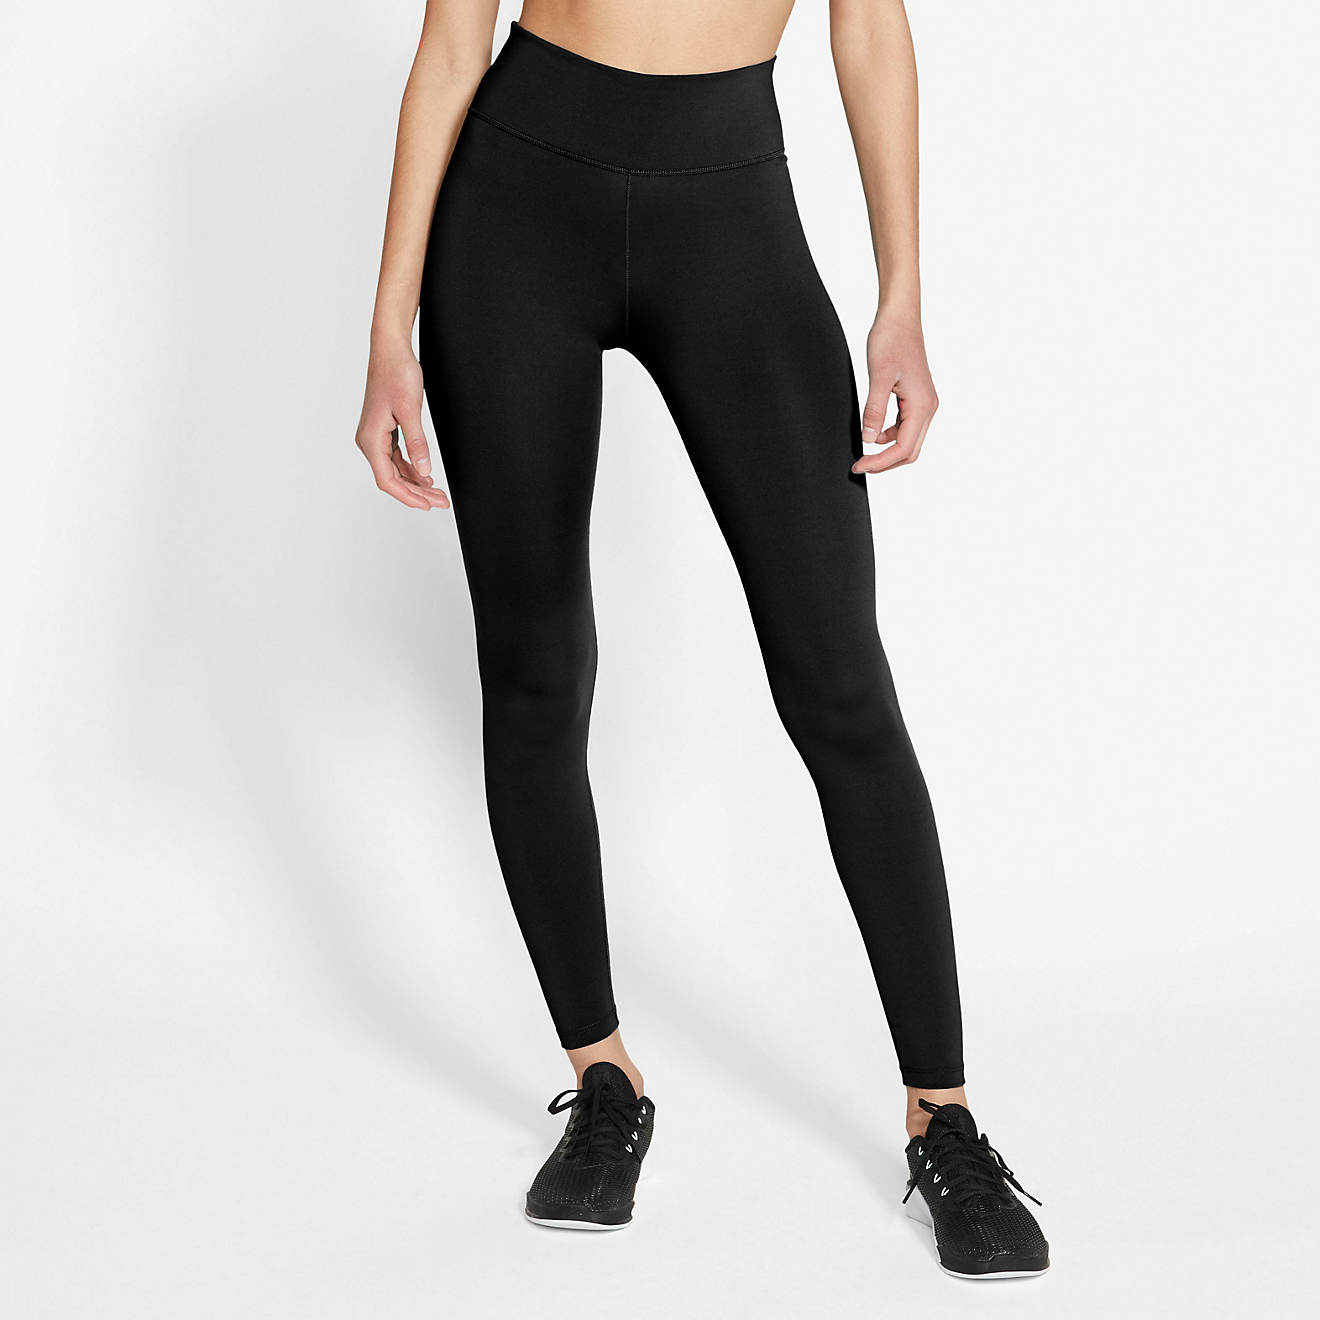 Temerity Kurve Ulempe Nike Women's One Mid Rise 2.0 Tights | Academy